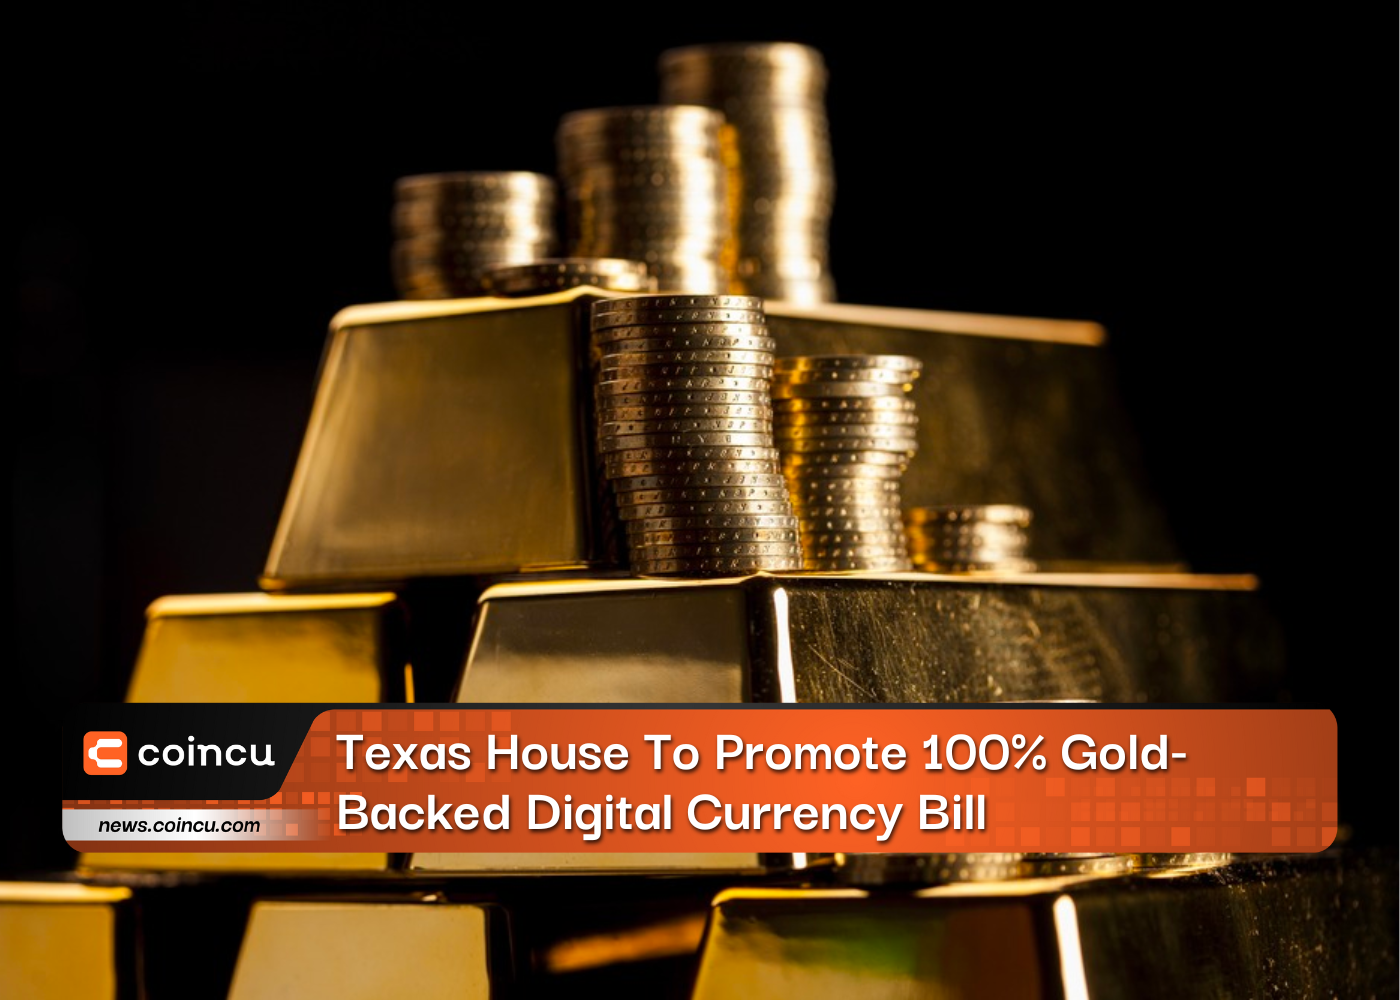 Texas House To Promote 100% Gold-Backed Digital Currency Bill